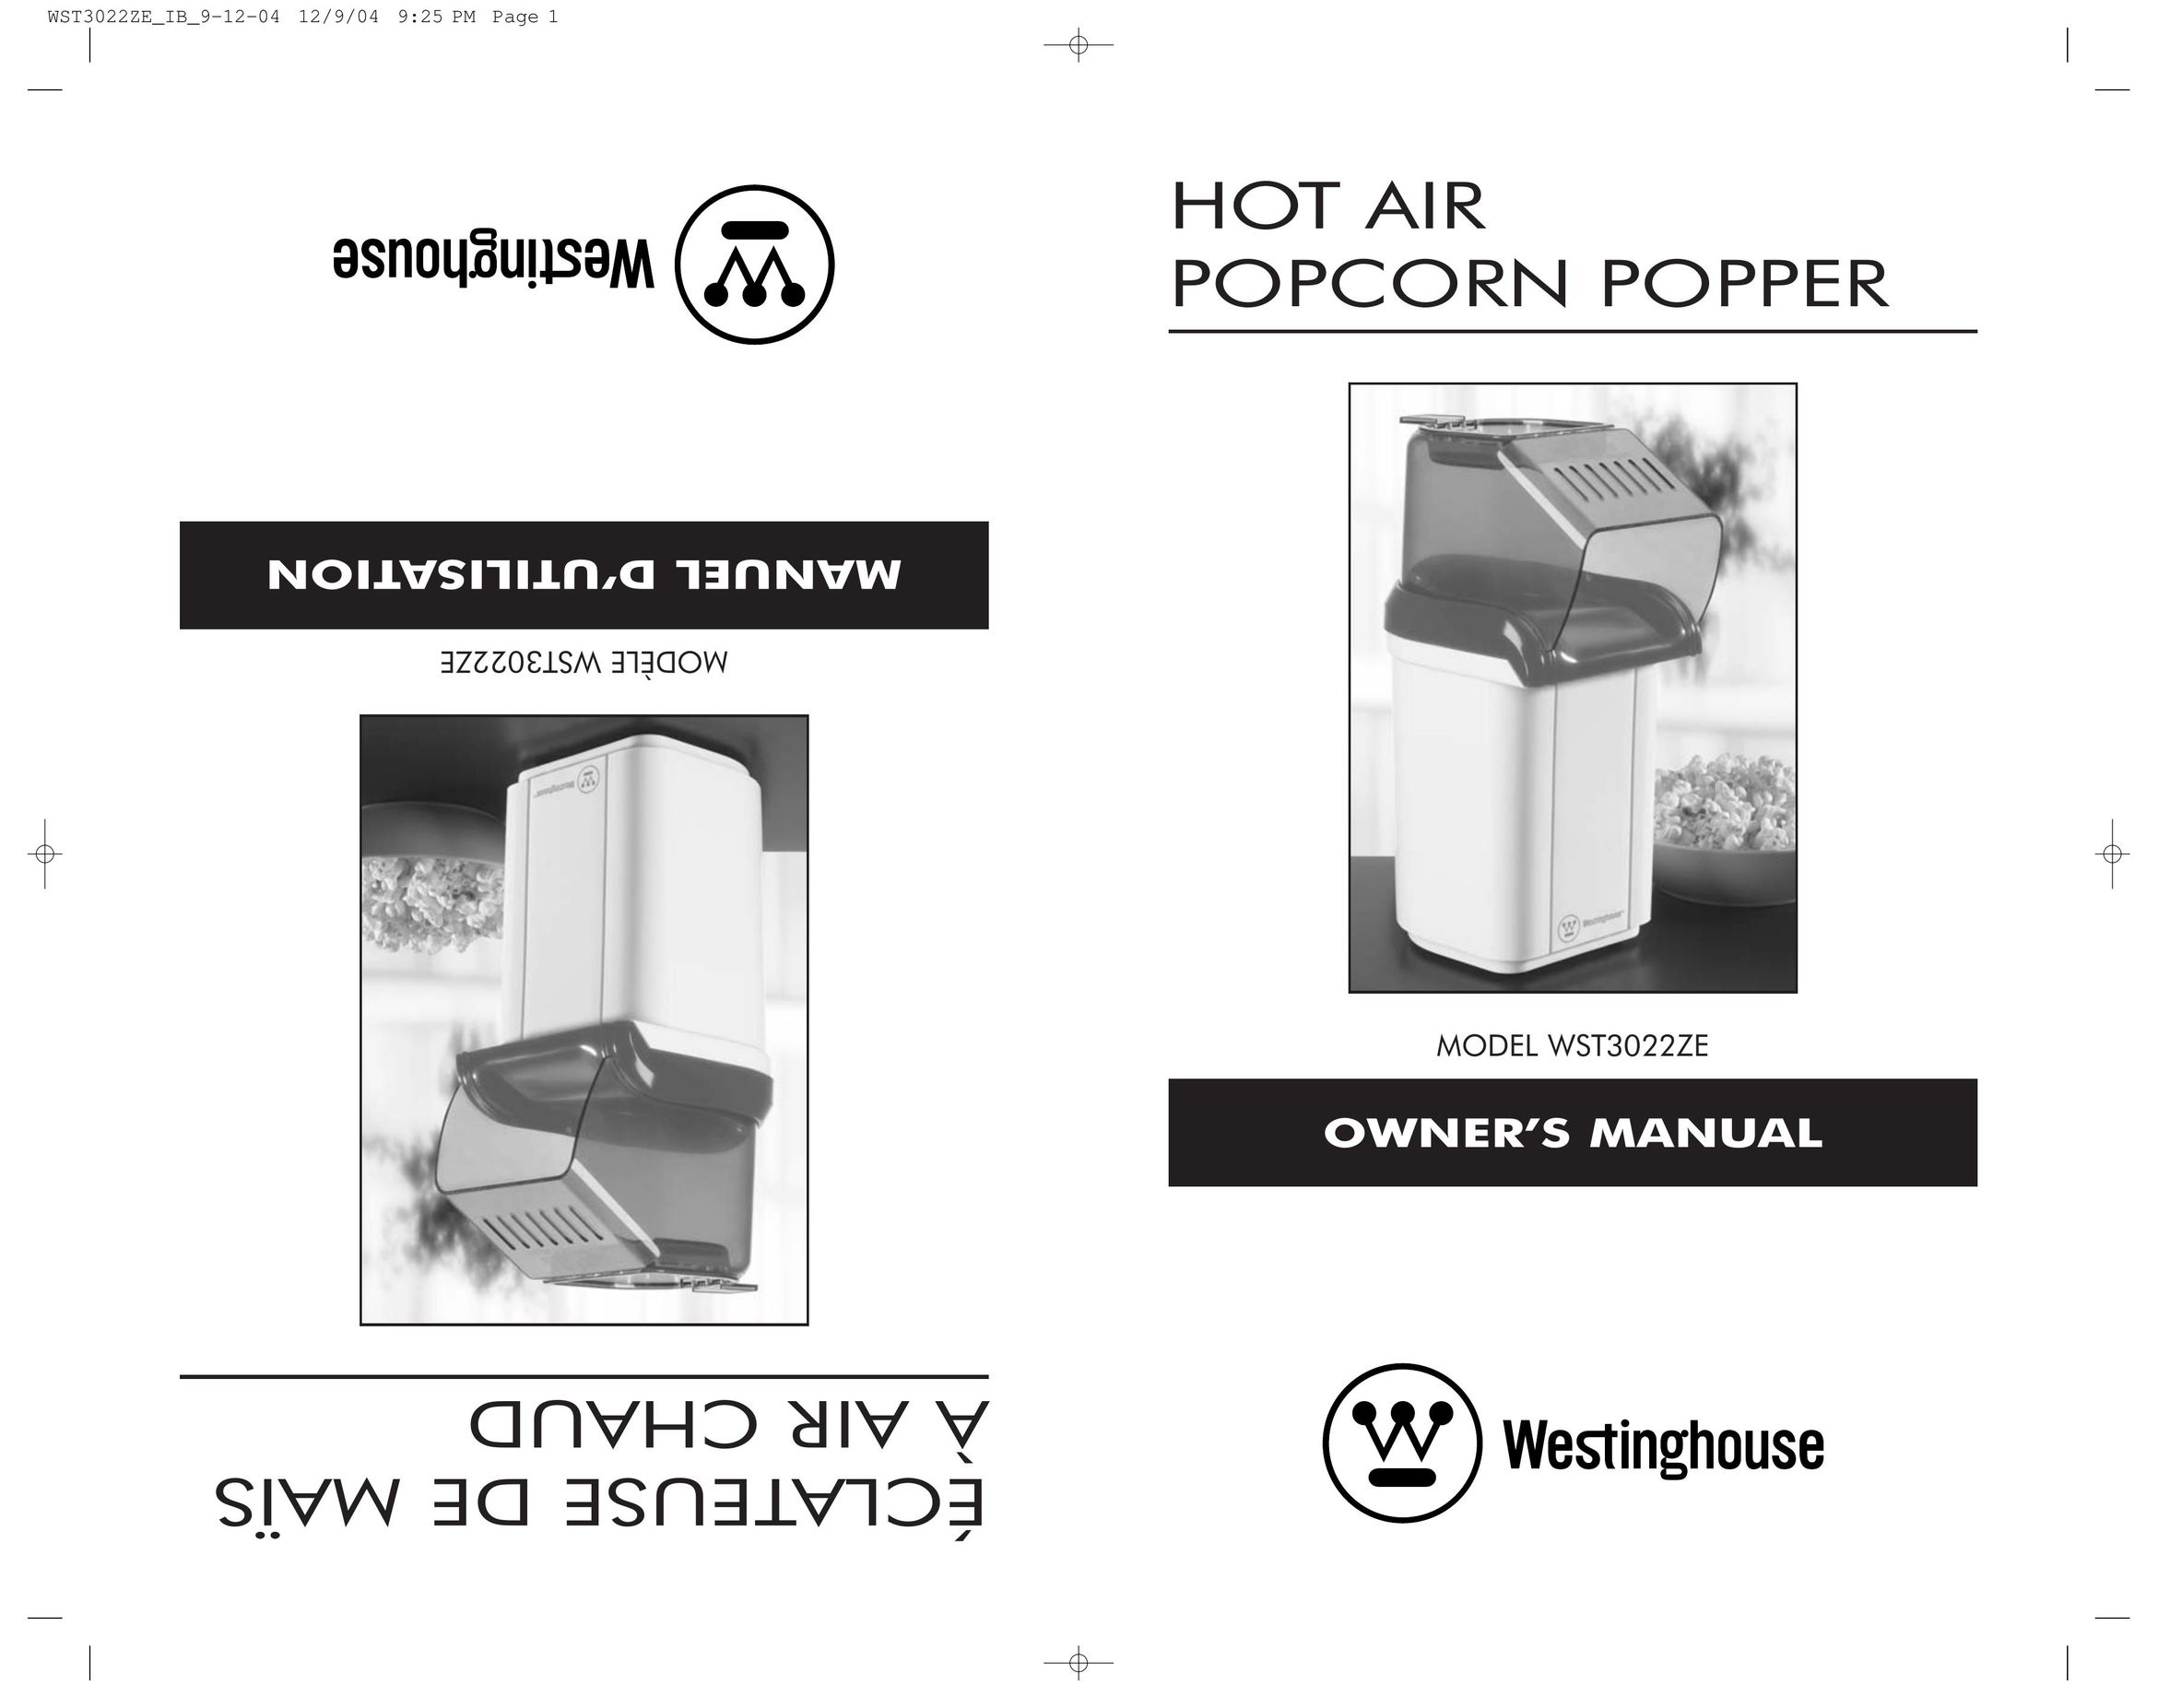 Toastmaster WST3022ZE Popcorn Poppers User Manual